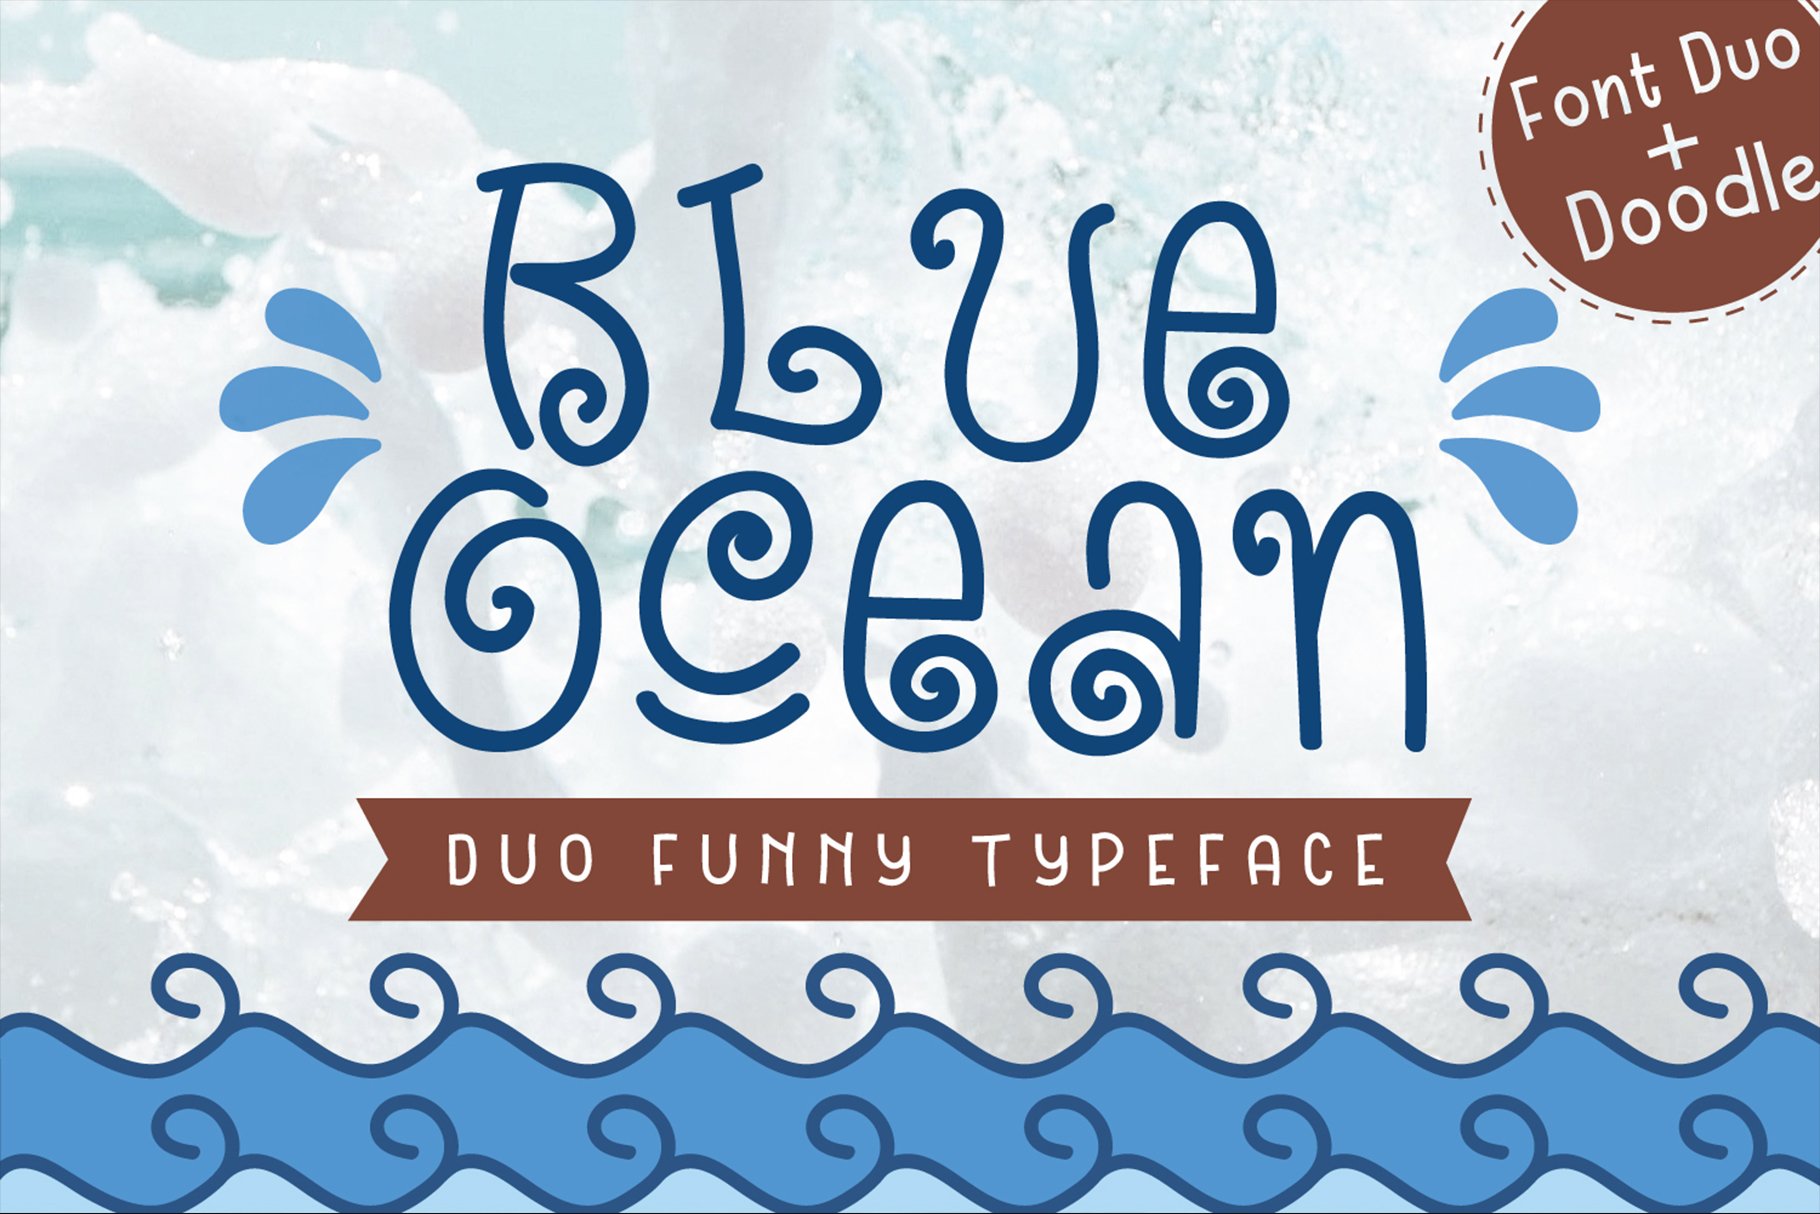 Blue Ocean - Cute Baby Font Duo cover image.